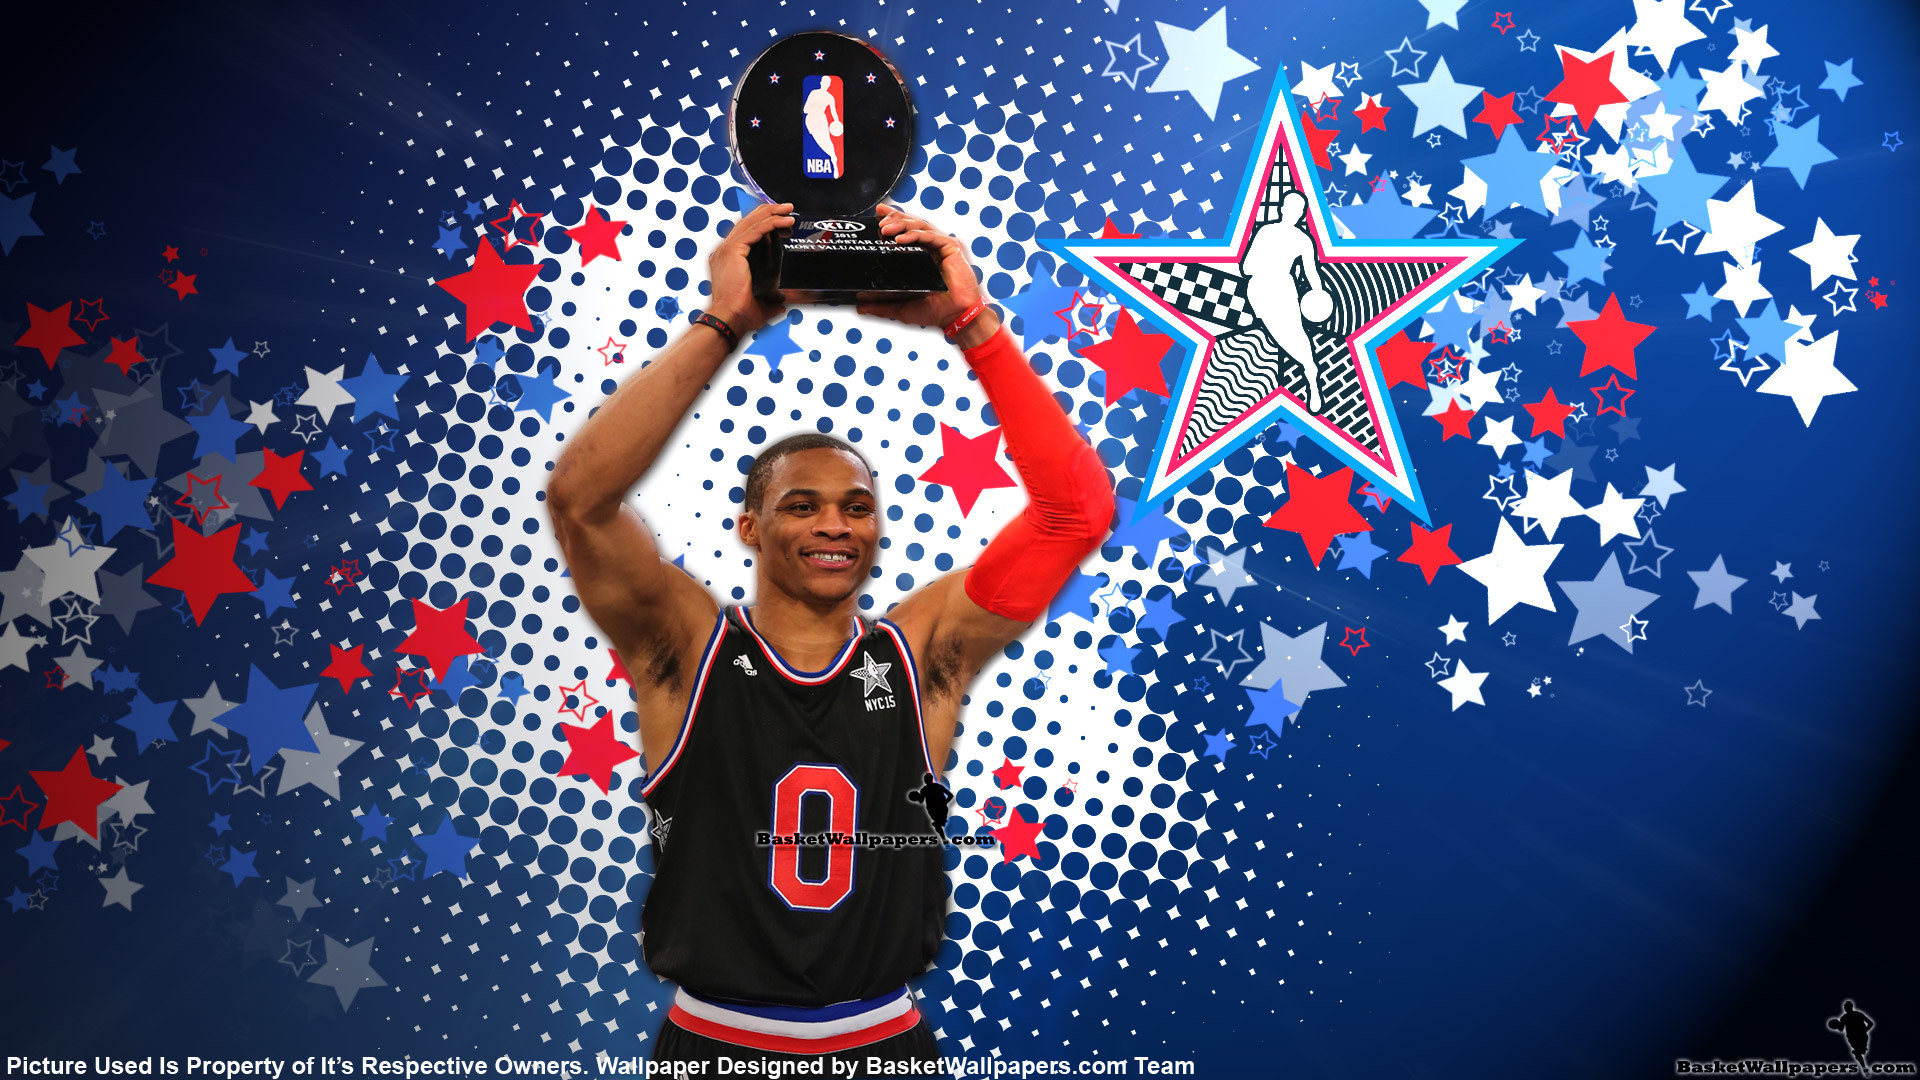 1920x1080 Russell-Westbrook-Russell-Westbrook-Height-wallpaper-wp6809607